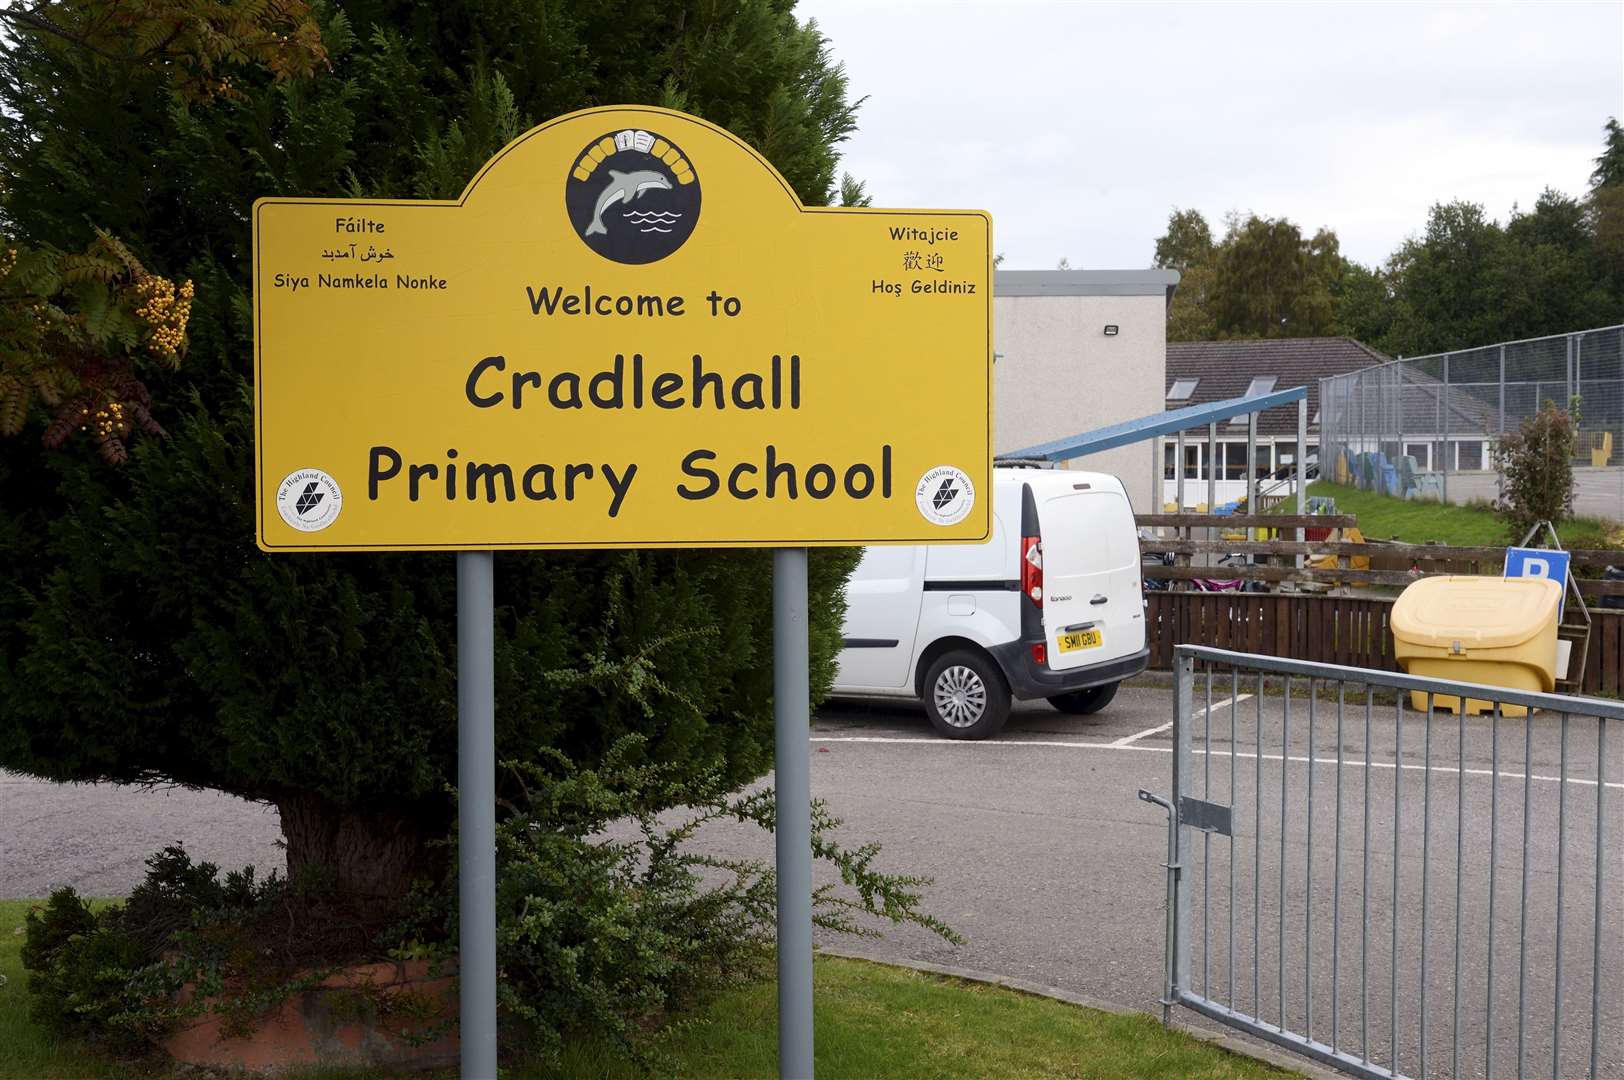 Lawrence Sutherland, the headteacher at Cradlehall Primary School in Inverness, is set to retire at the end of the academic year.